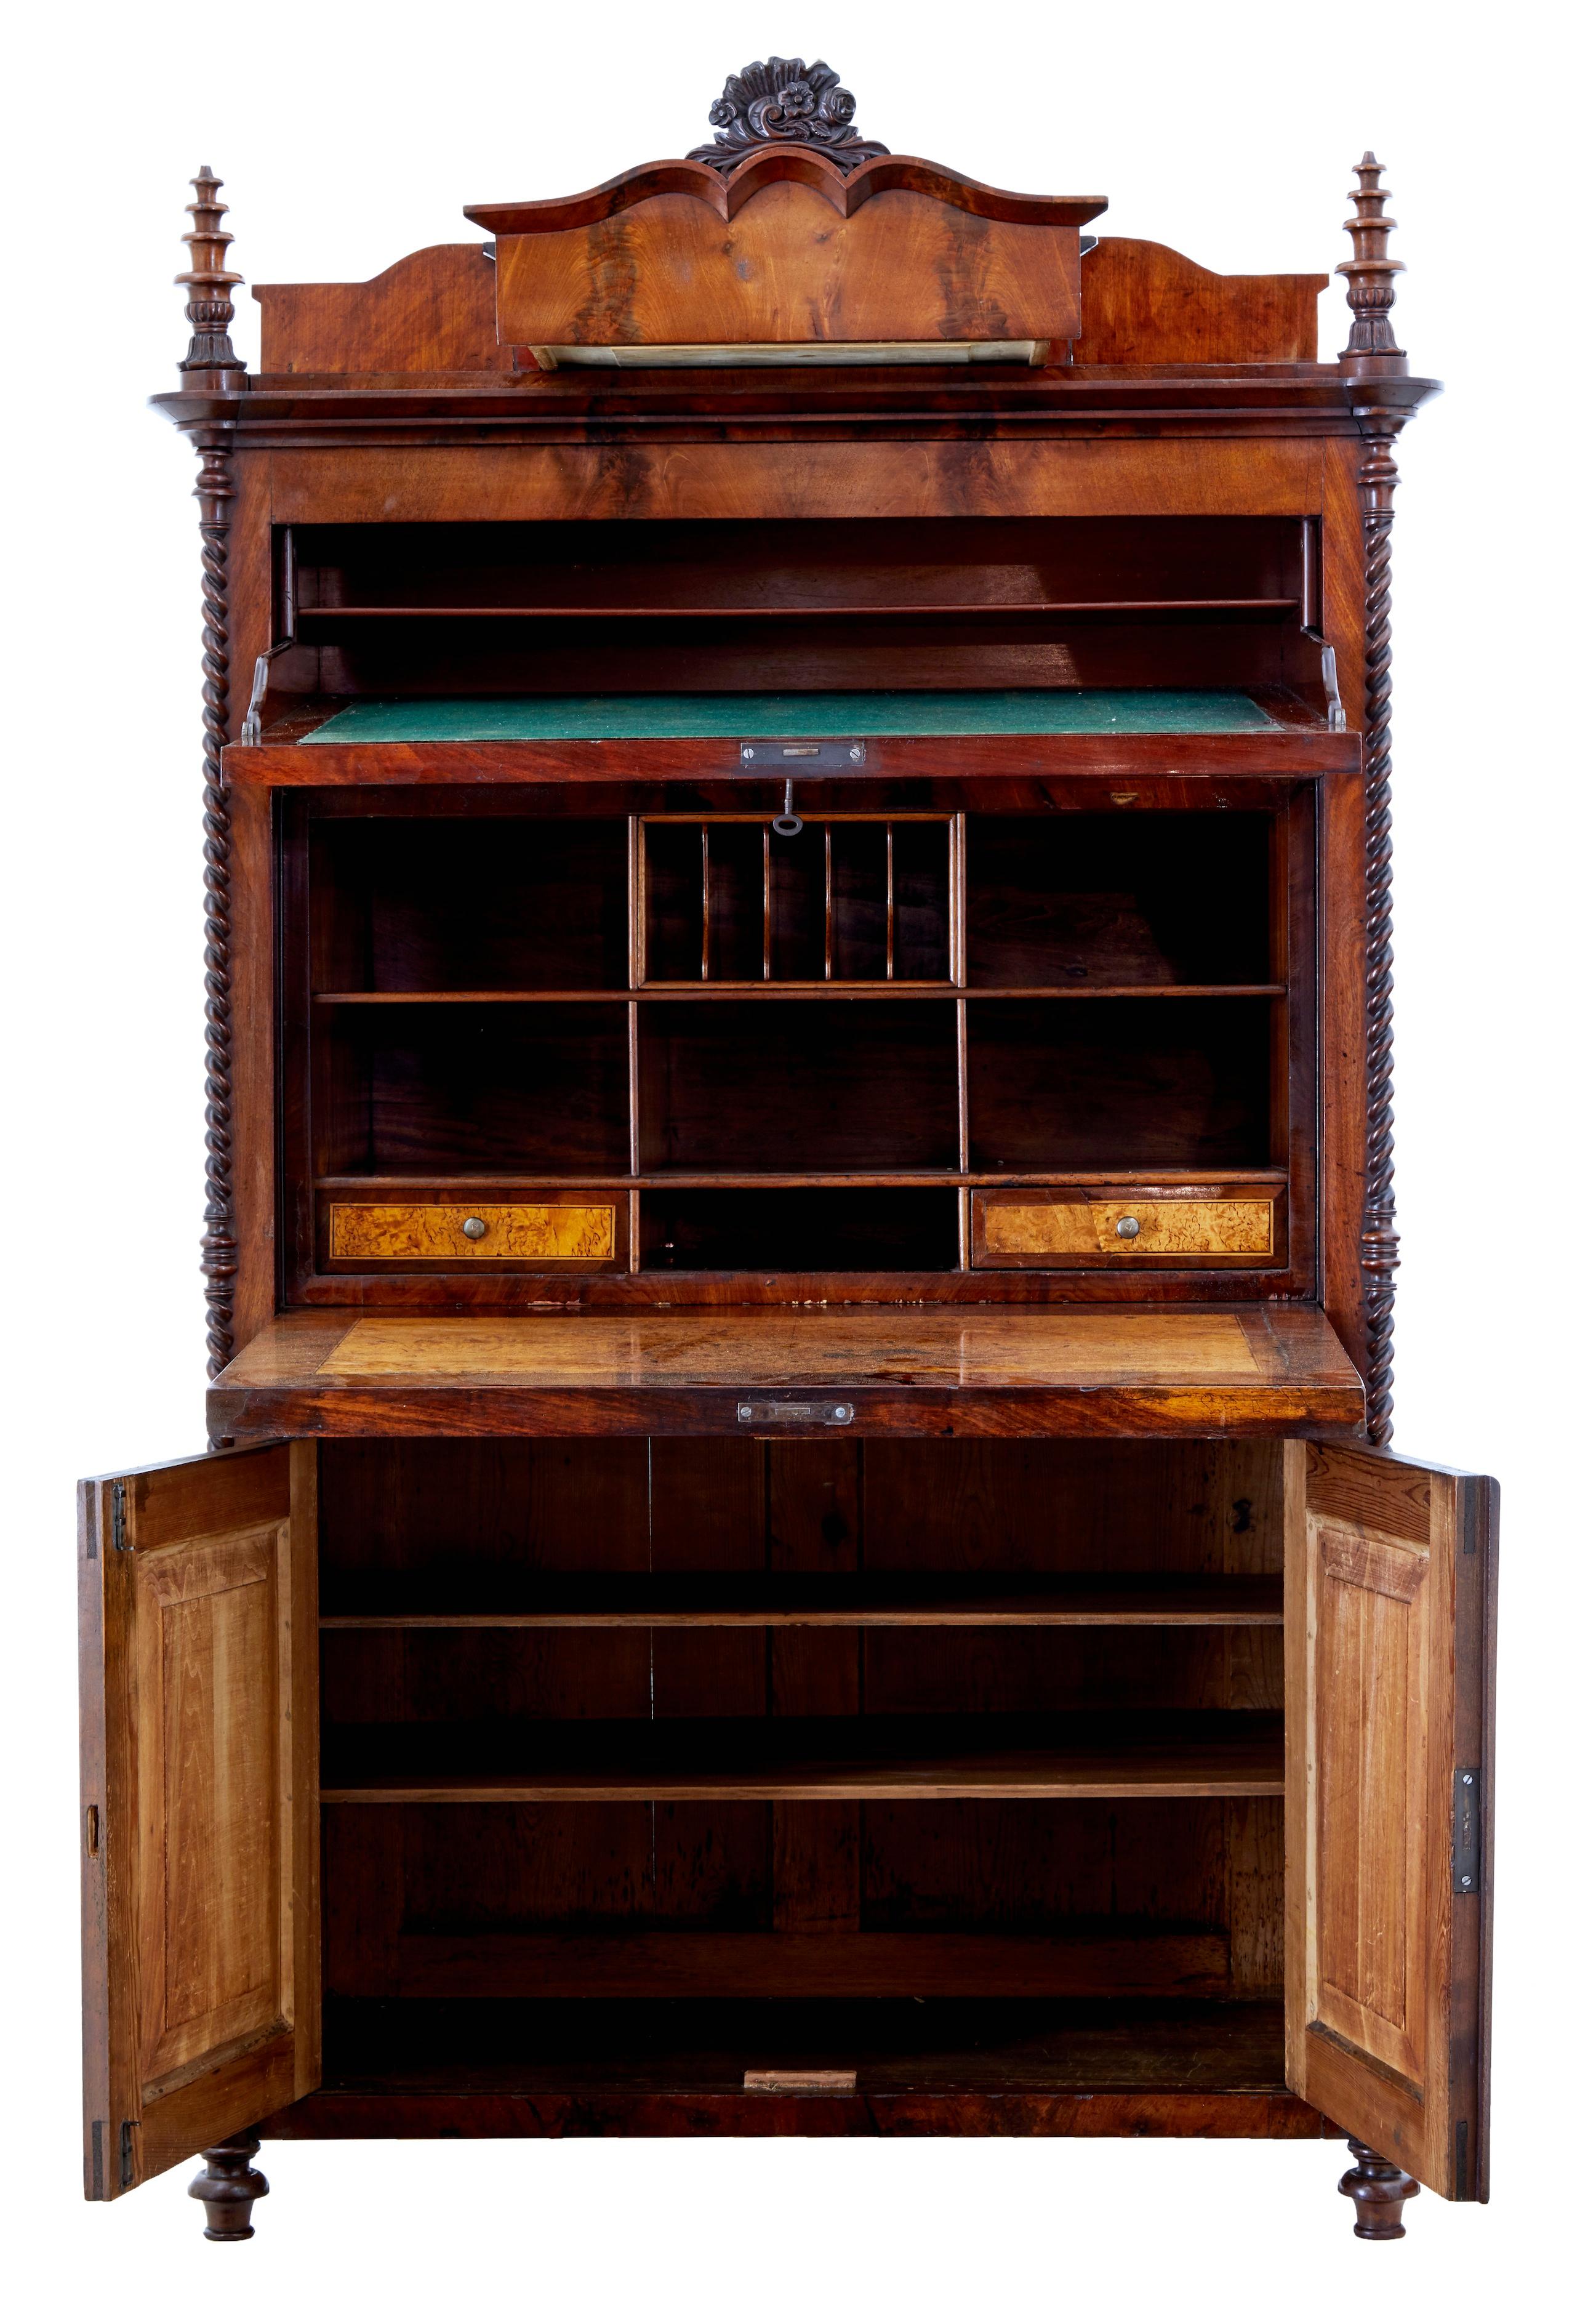 Good quality french escritoire, circa 1830.
Unusual offers an additional pull out sliding writing slope for use in a standing position.
Fall opens to reveal a partially fitted interior of drawers and pigeon holes. Central pigeon holes pull out to